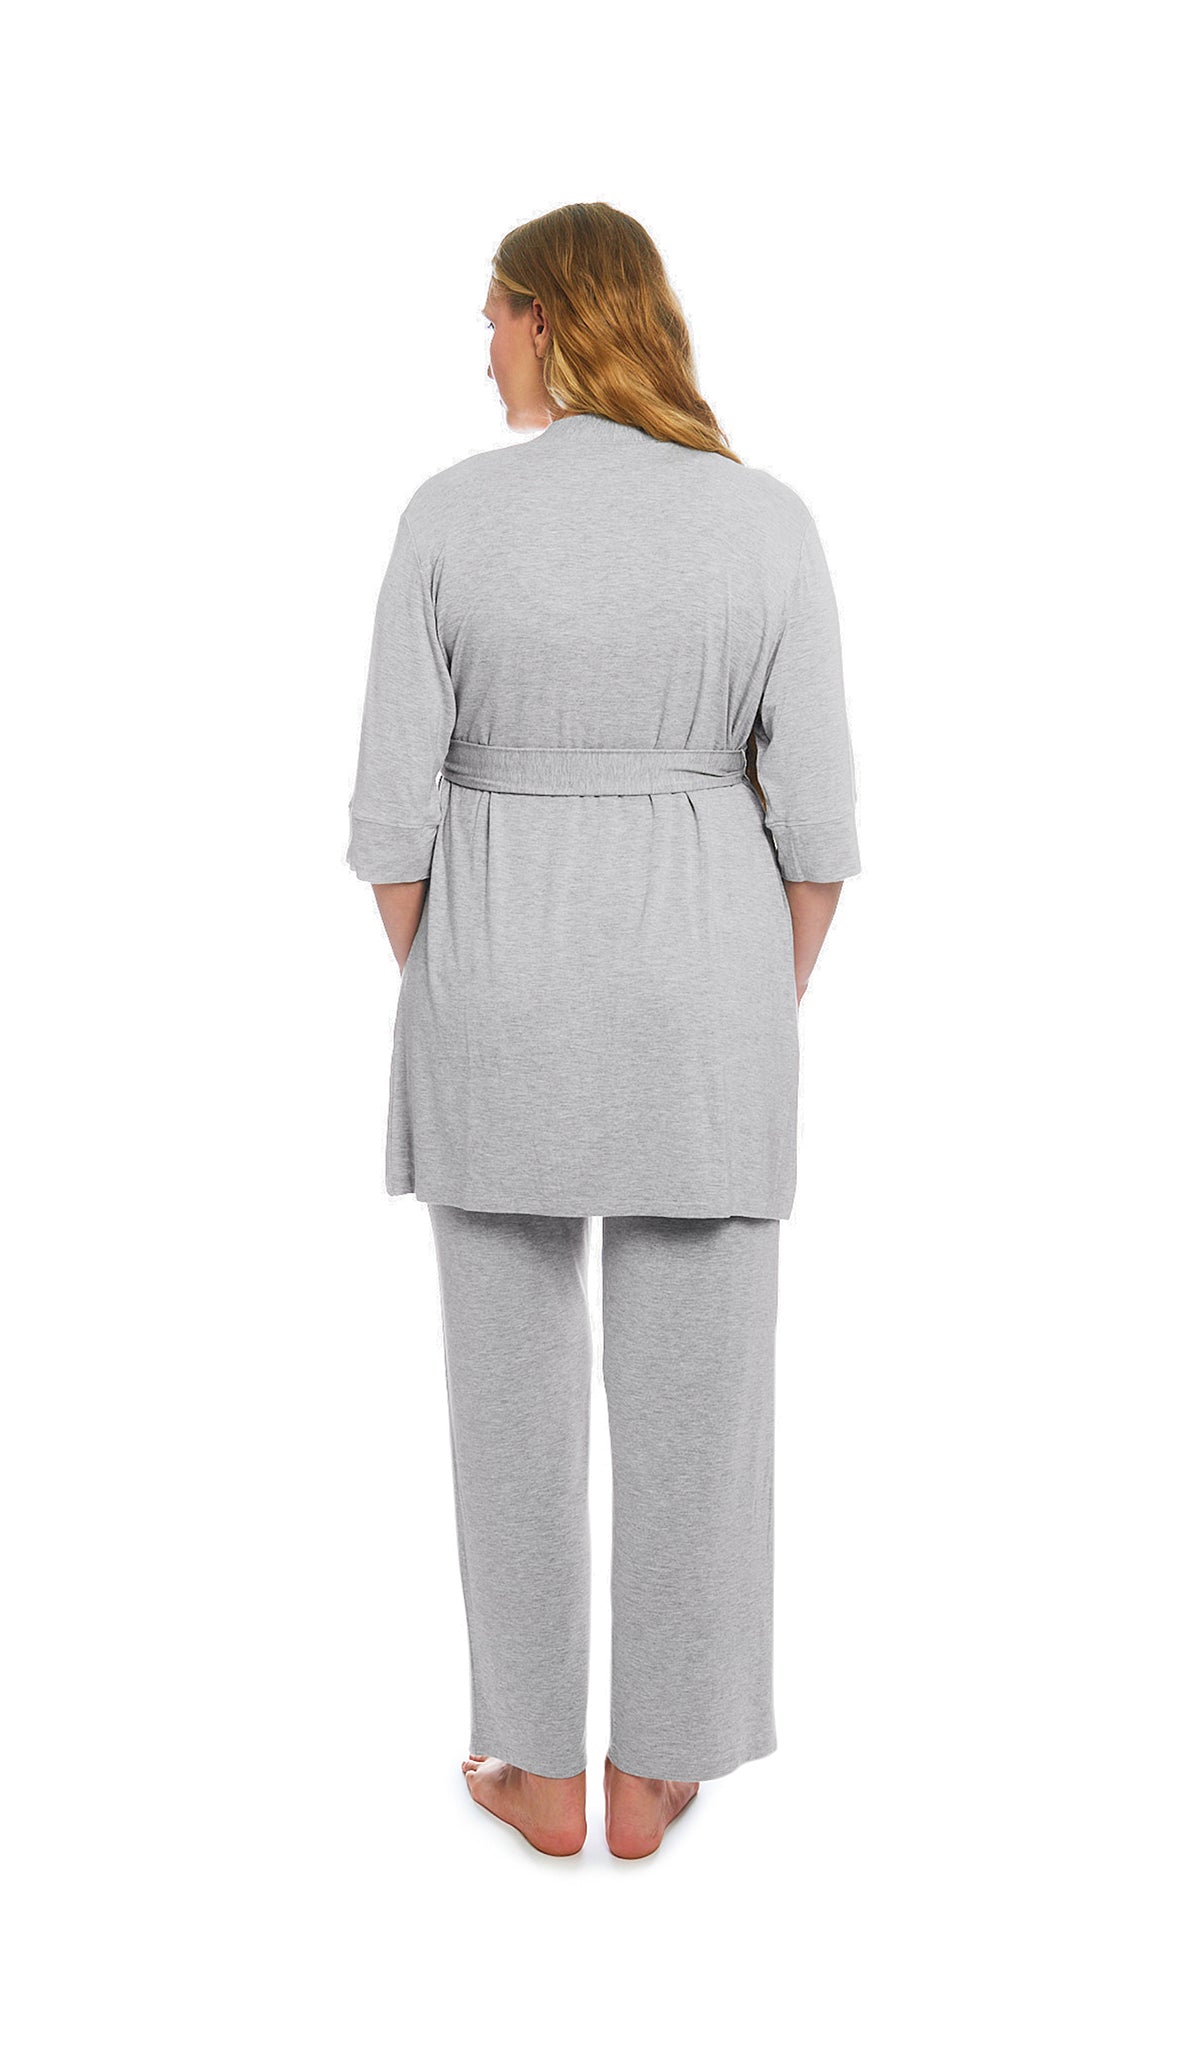 Heather Grey Solid Analise 3-Piece Set, back shot of woman wearing robe and pant.